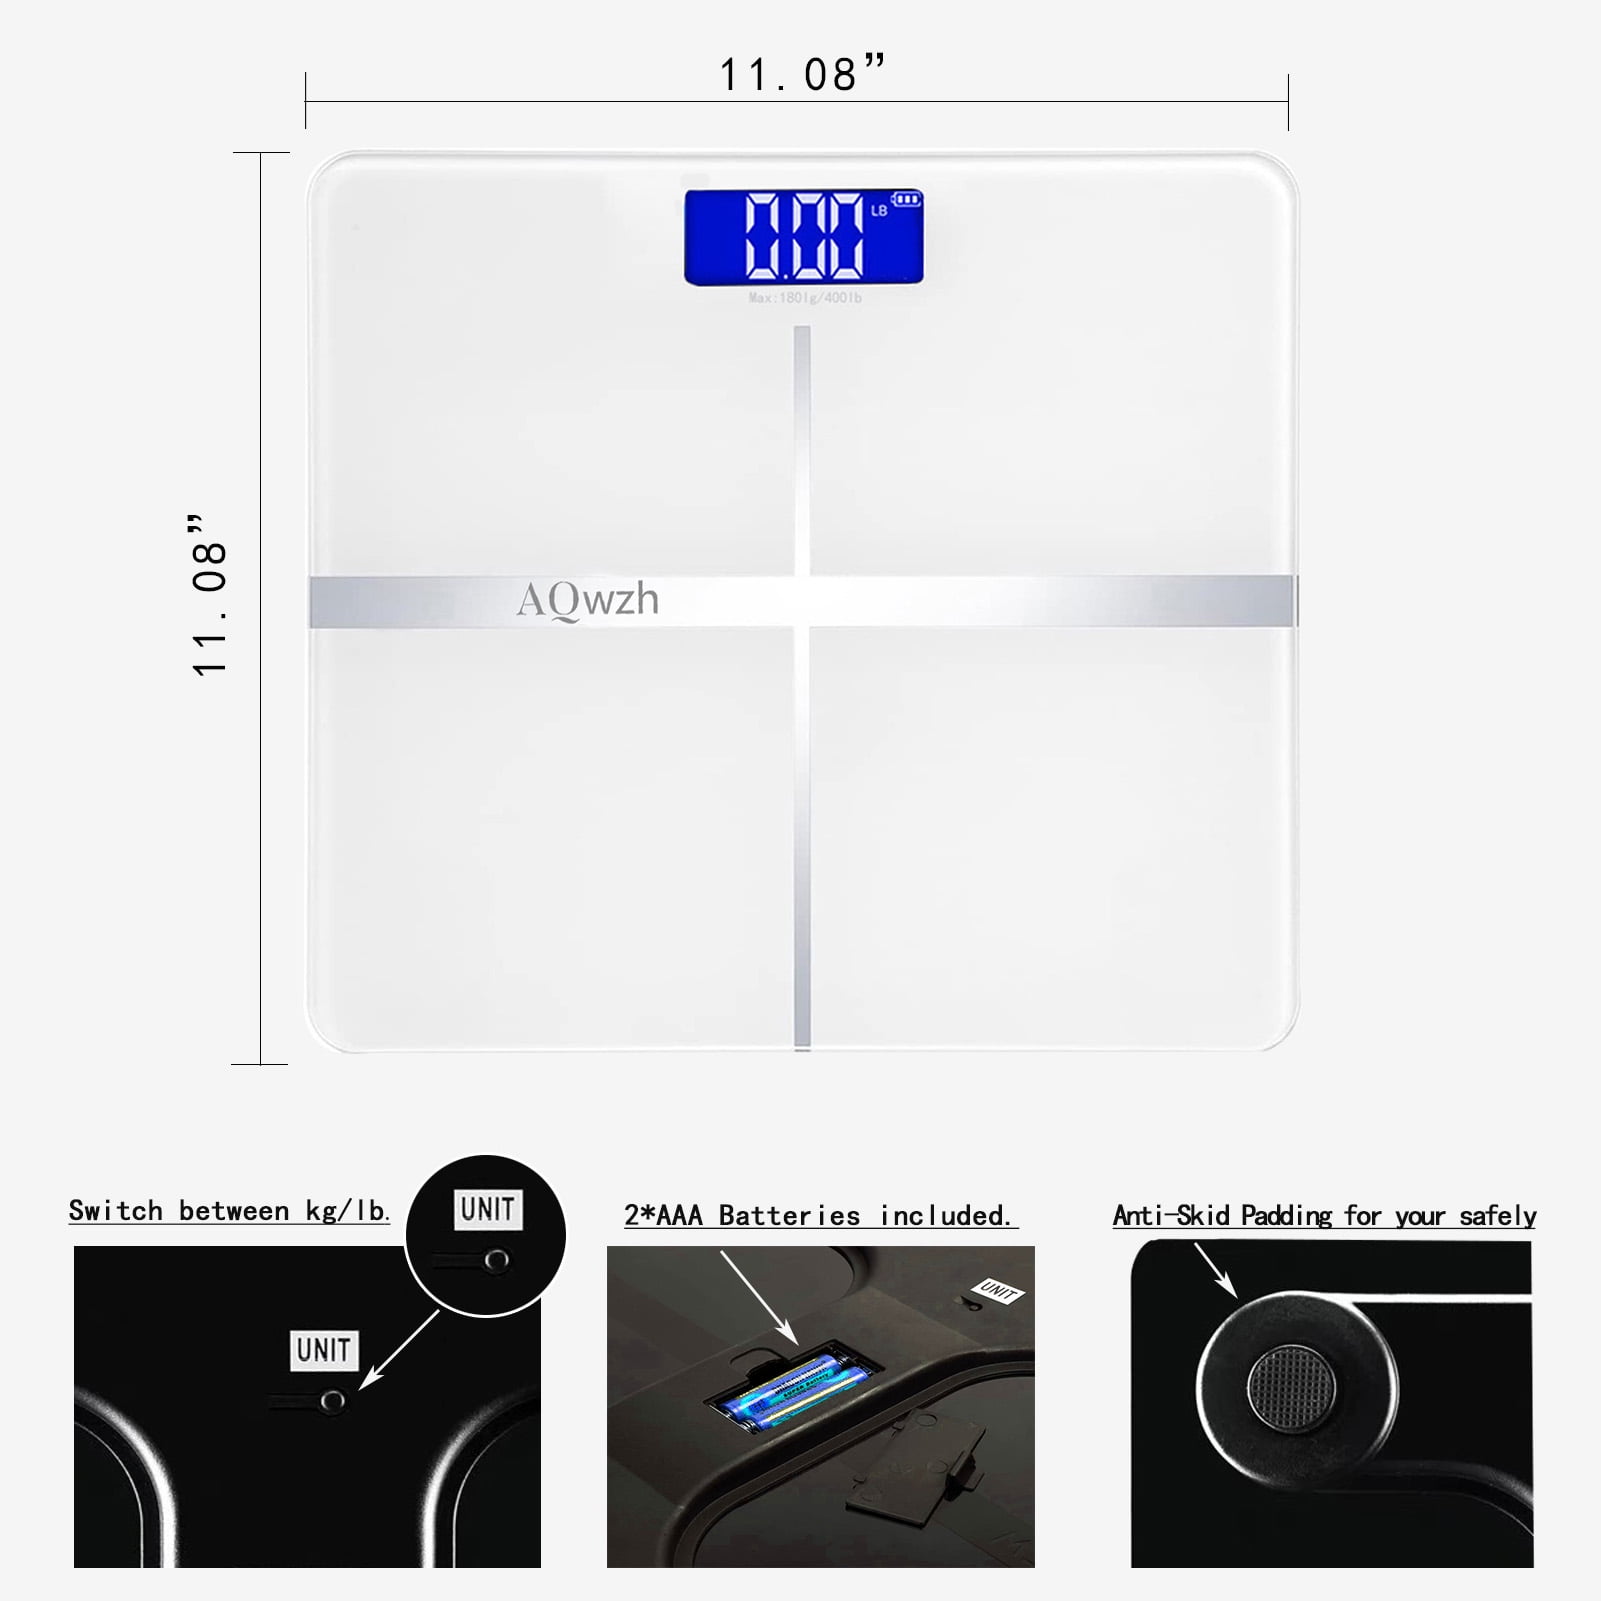 Digital Scale, Body Weight Bathroom Scale 396lb/180kg High Accuracy, Step-On Technology with Lithium Rechargeable Battery. - Black, New